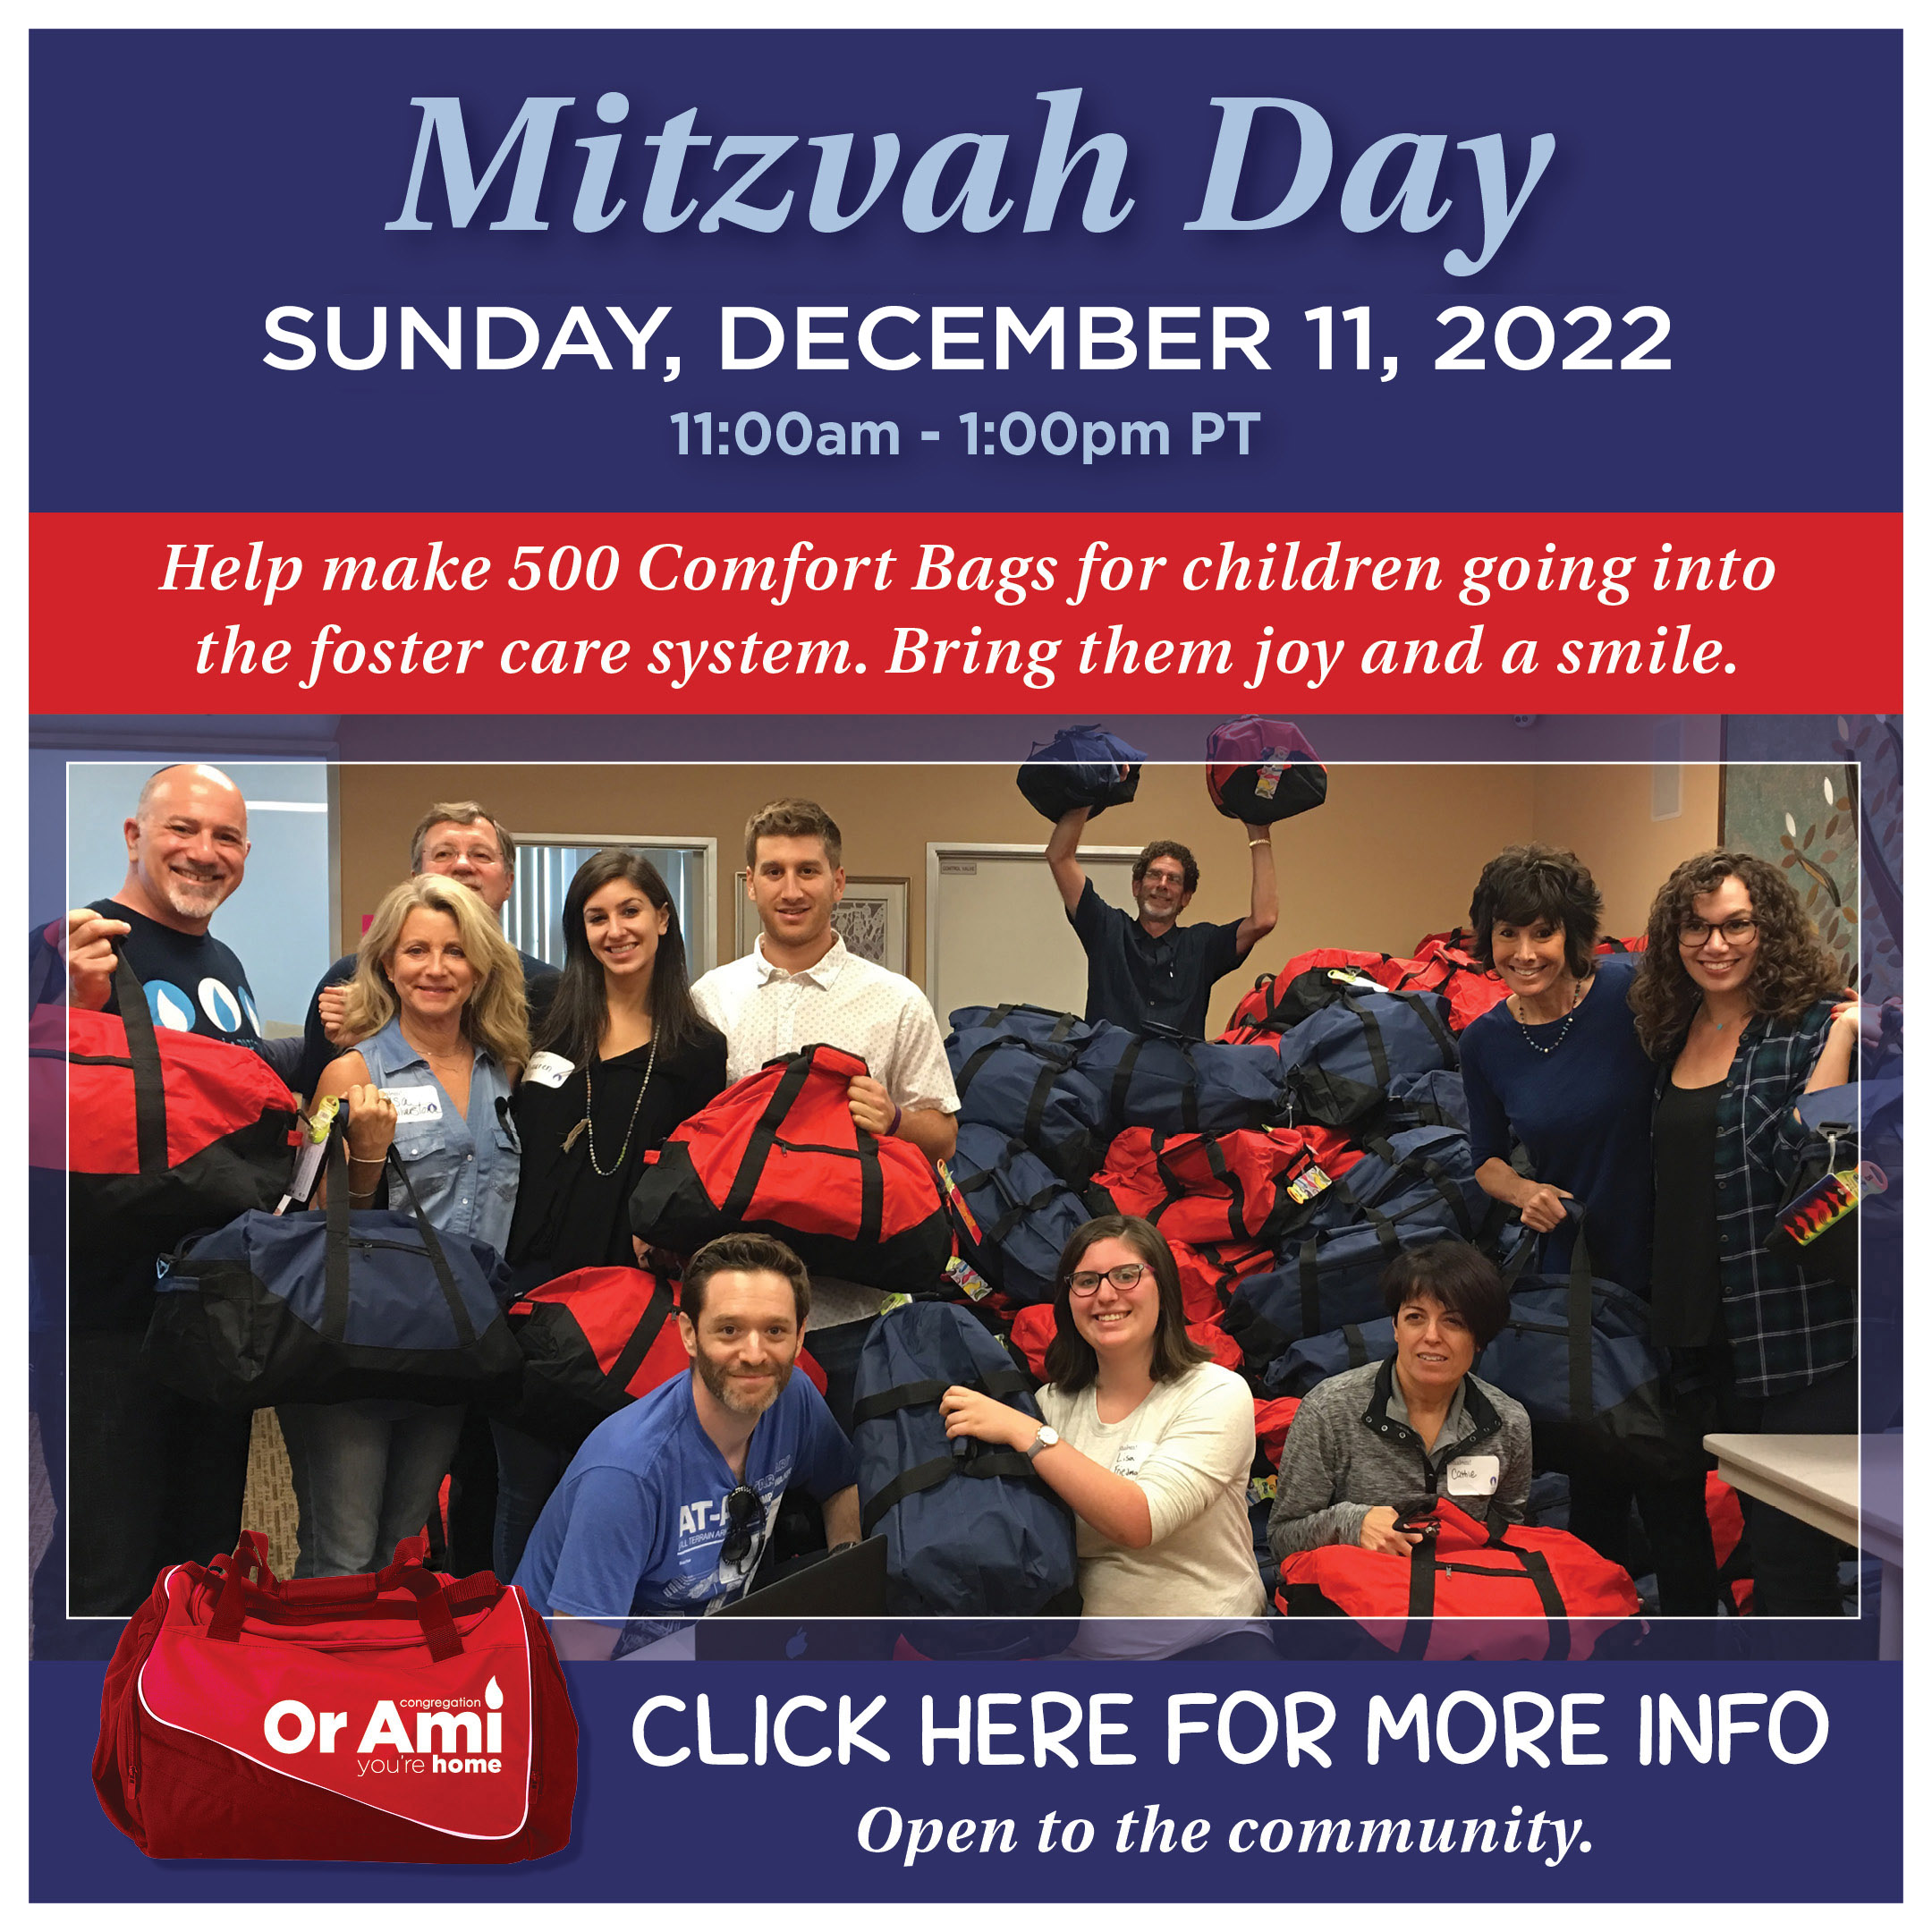 Mitzvah Day 2022 with CLICK